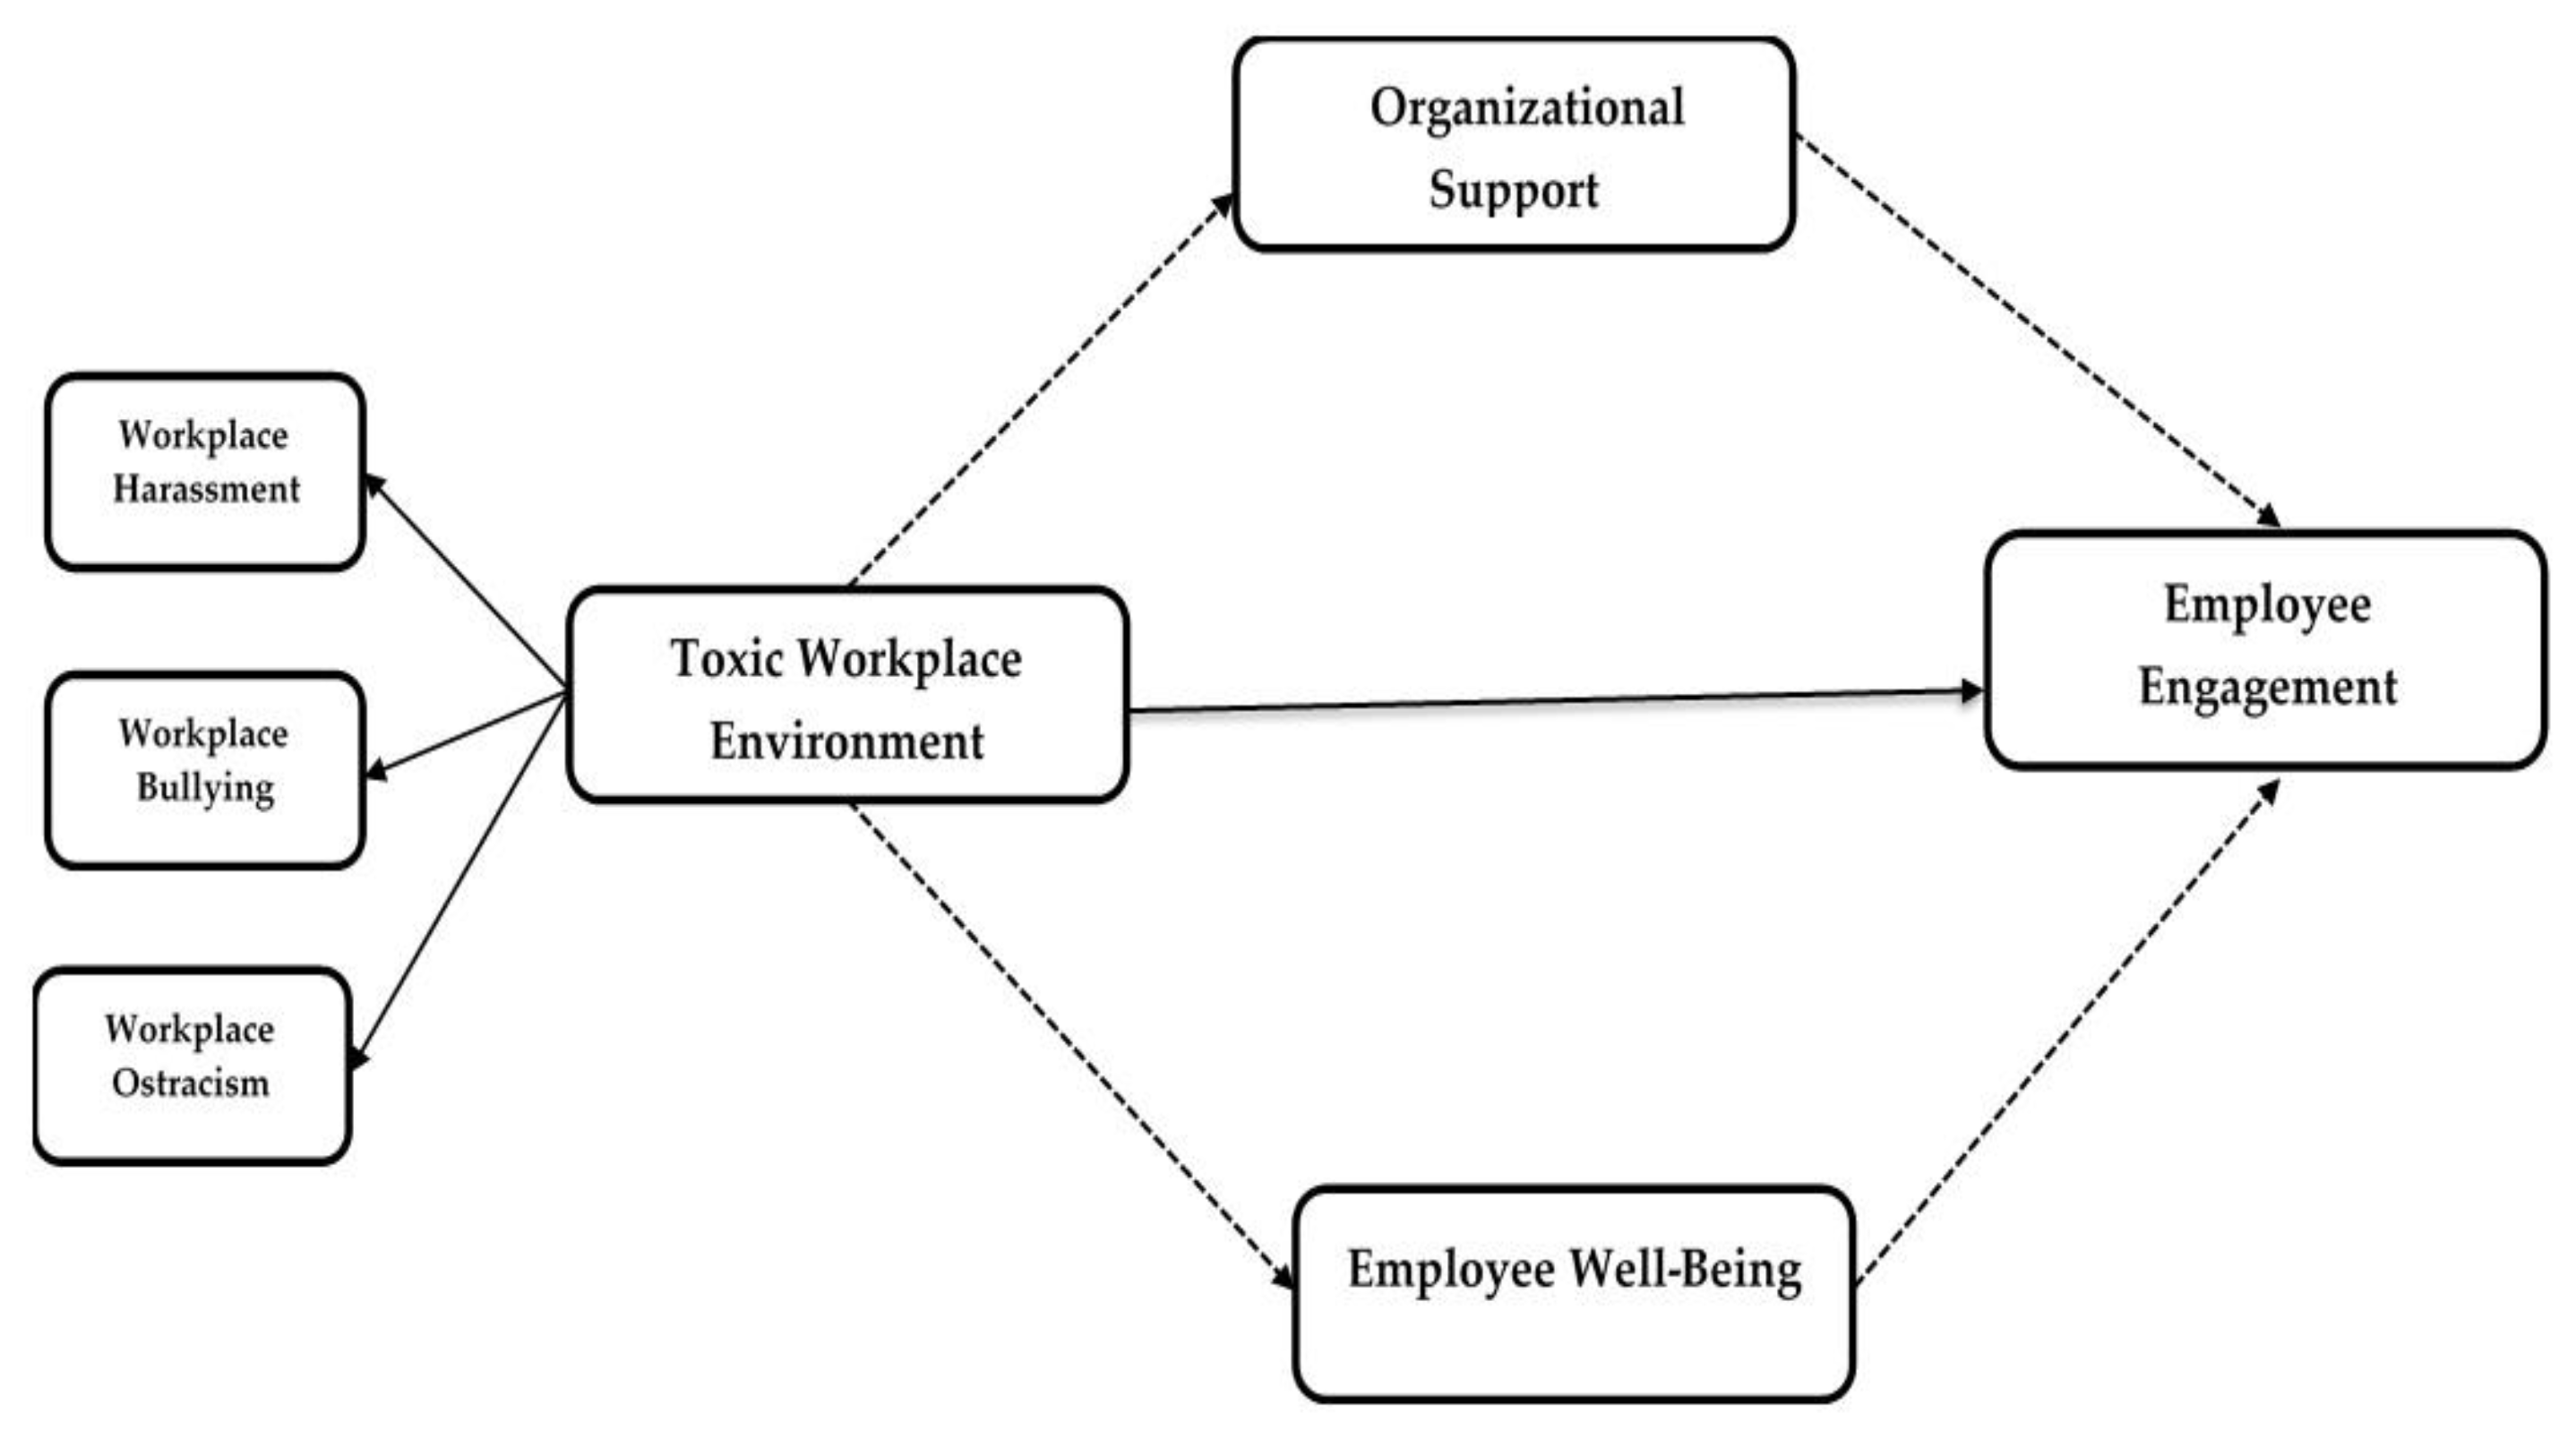 Interactional Justice in the Workplace: Definition & Overview